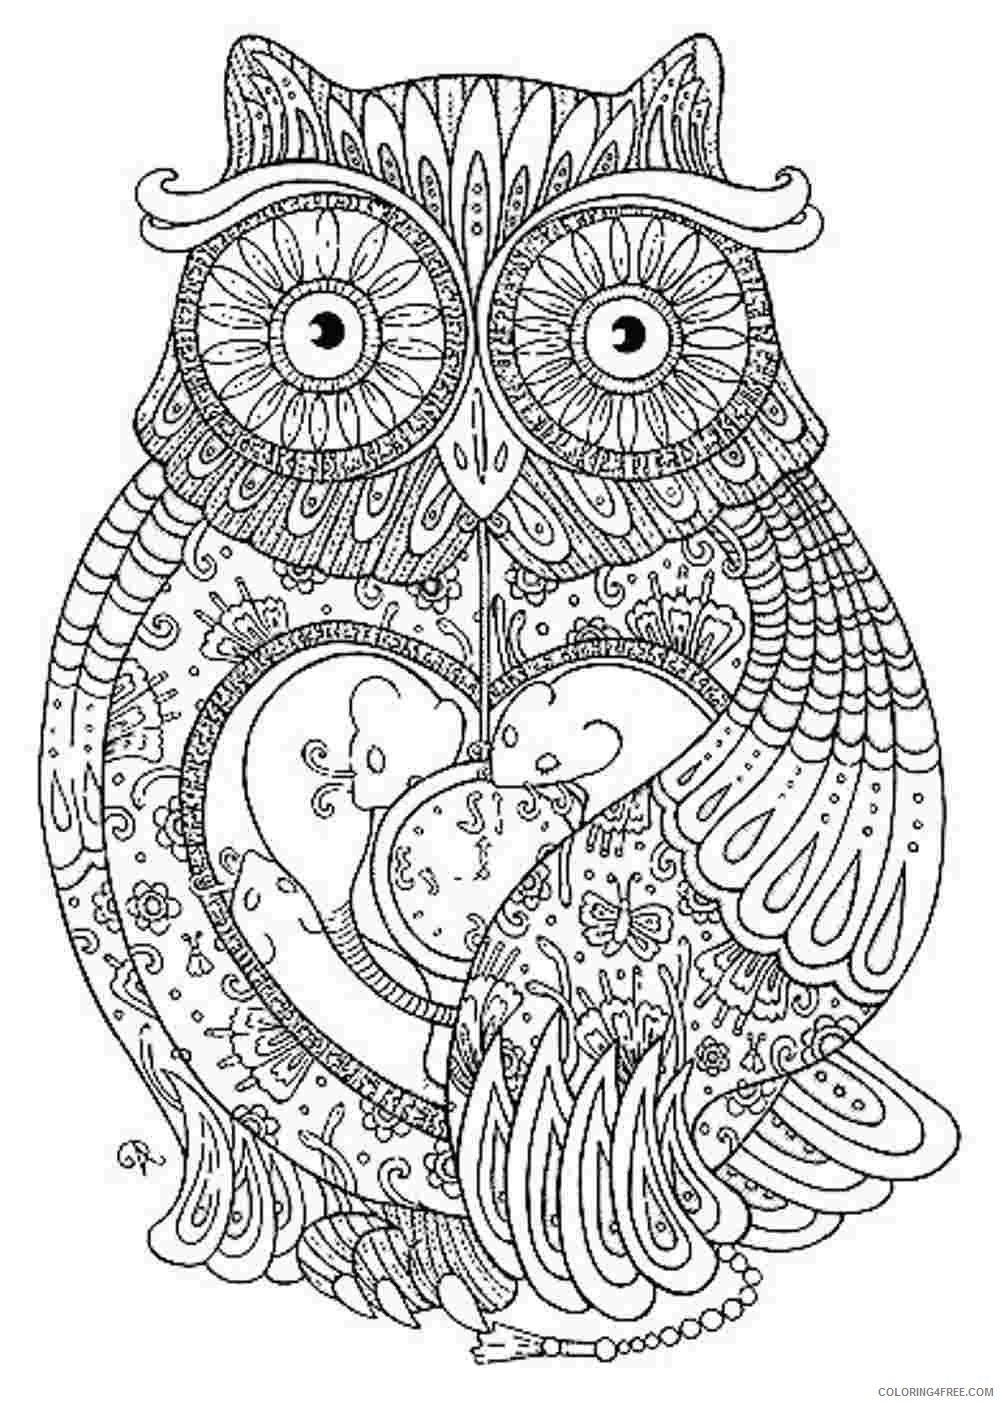 grown up coloring pages abstract owl Coloring4free